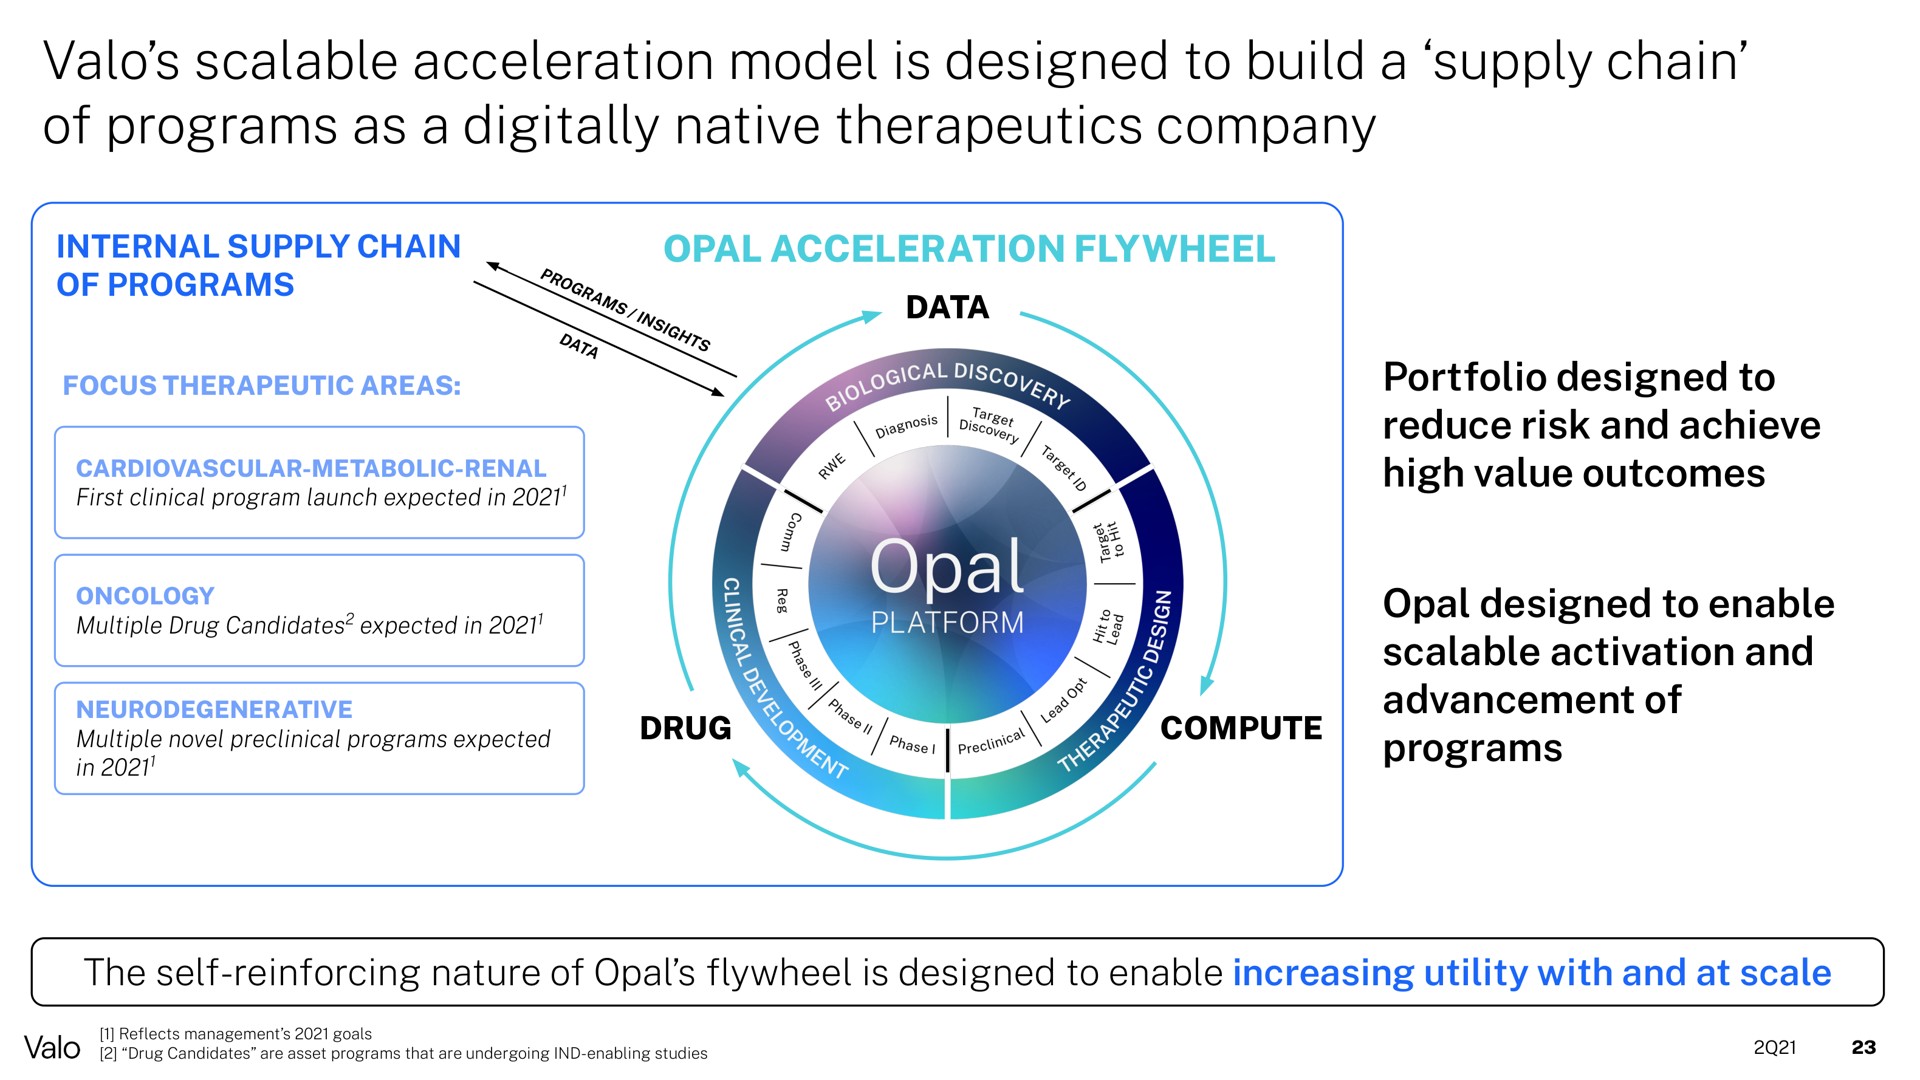 scalable acceleration model is designed to build a supply chain of programs as a digitally native therapeutics company | Valo